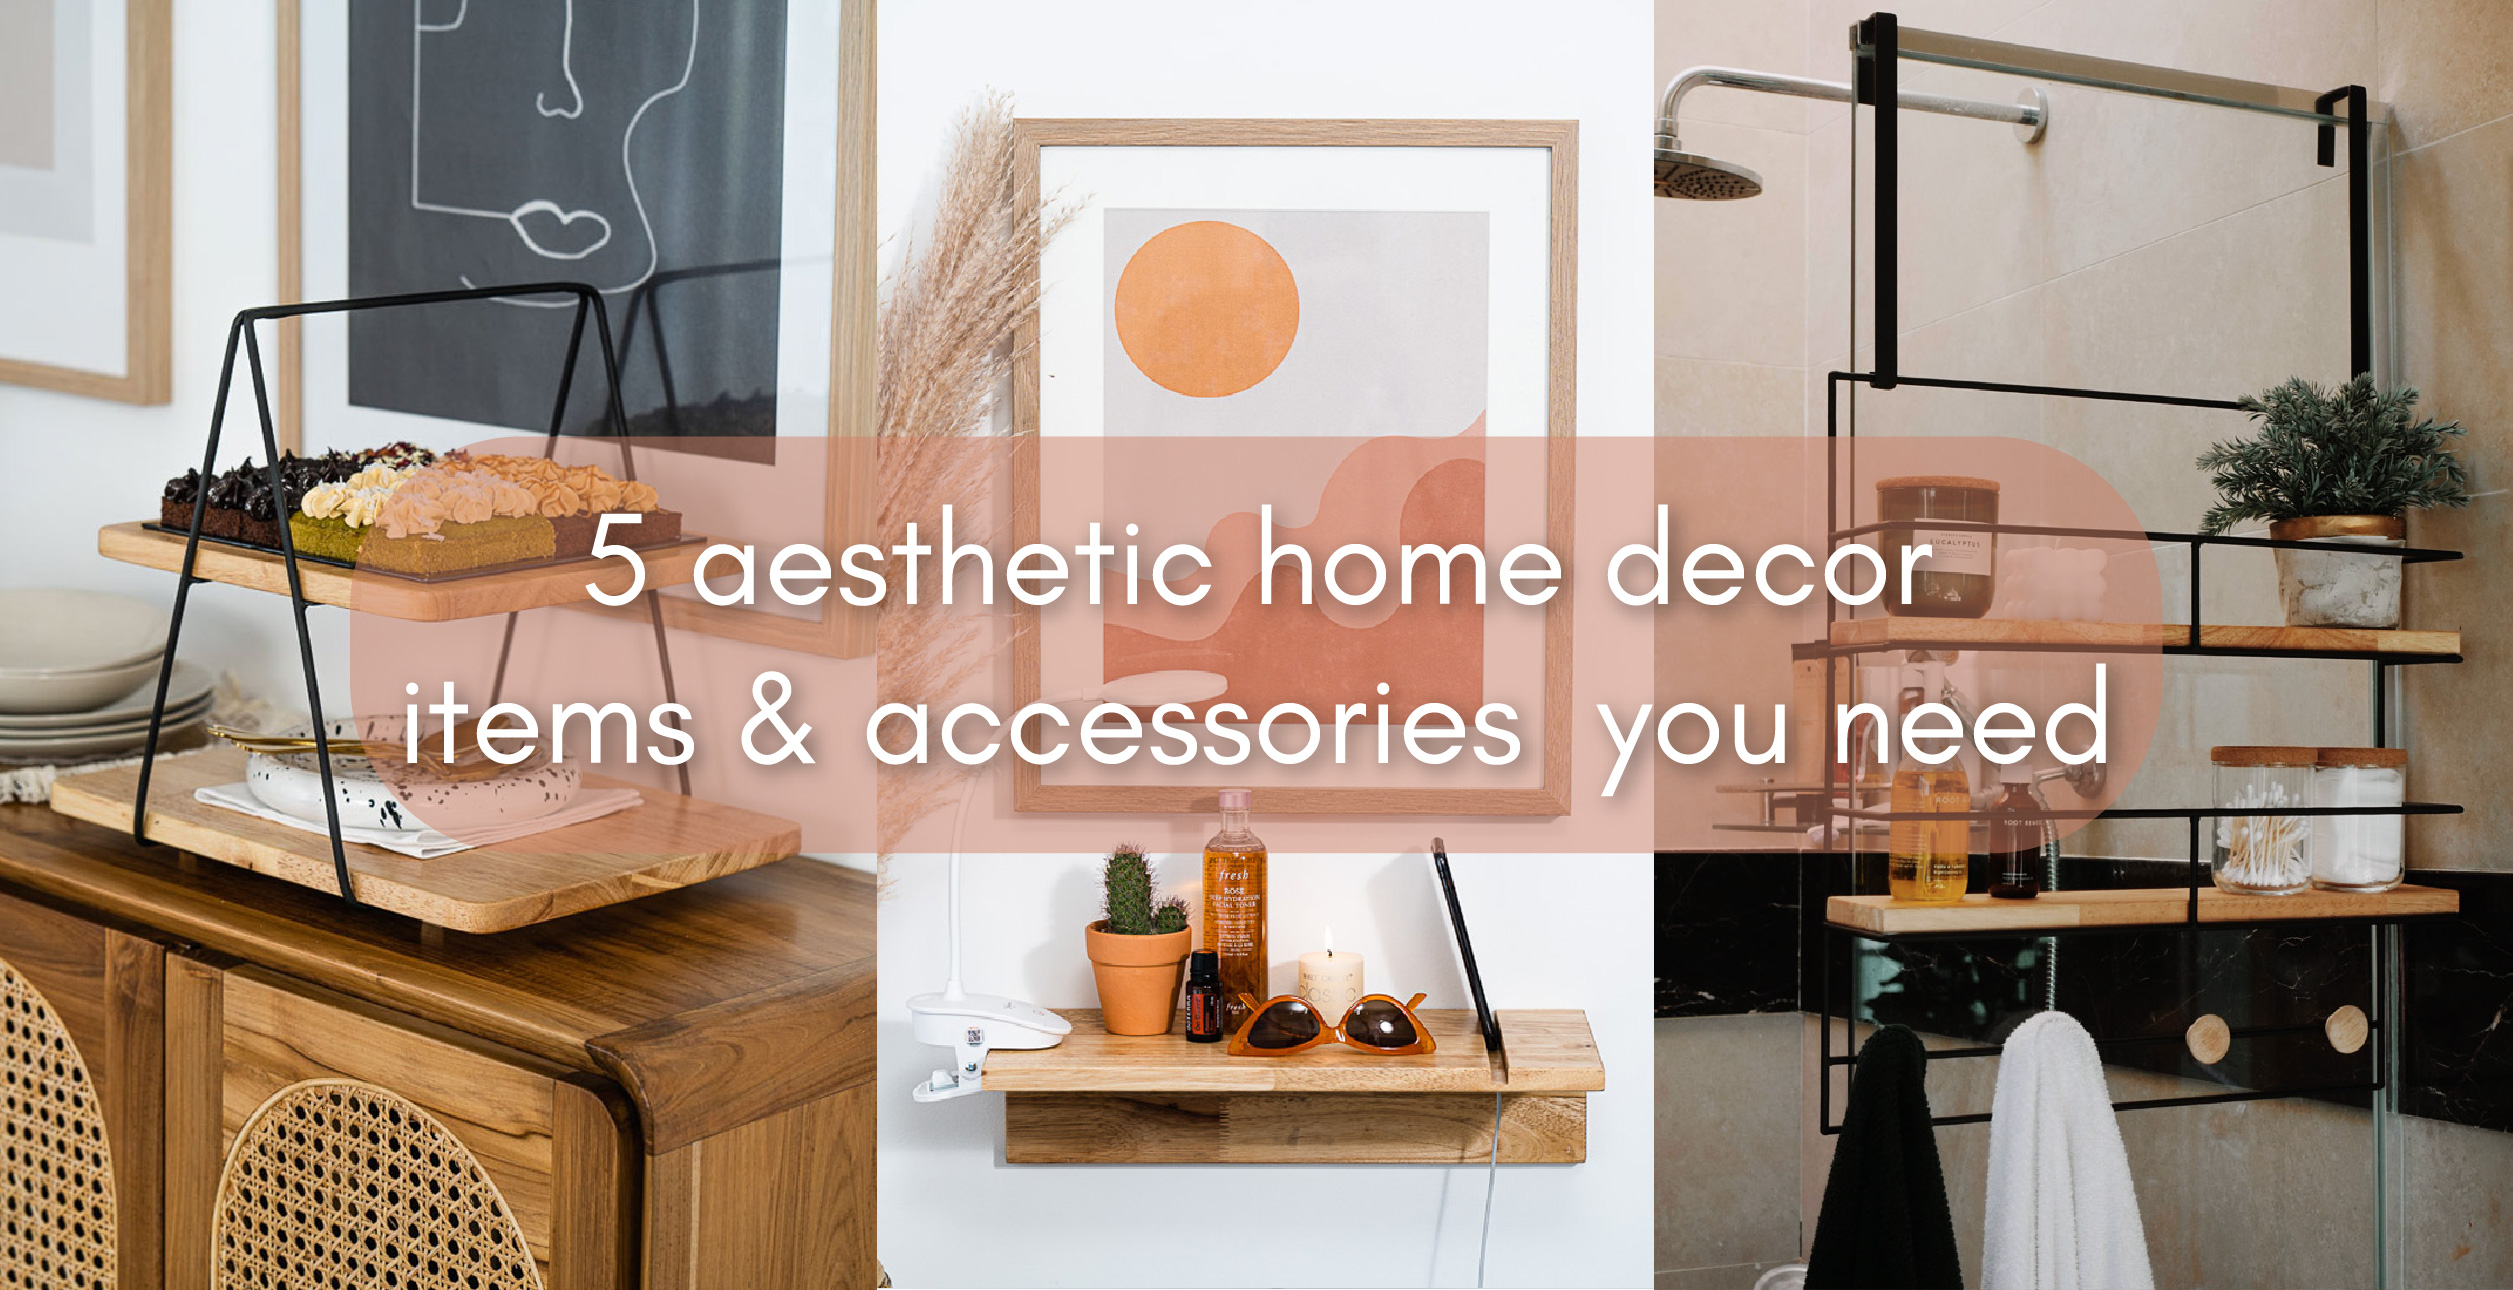 How To Use Bohemian Home Decor To Desire